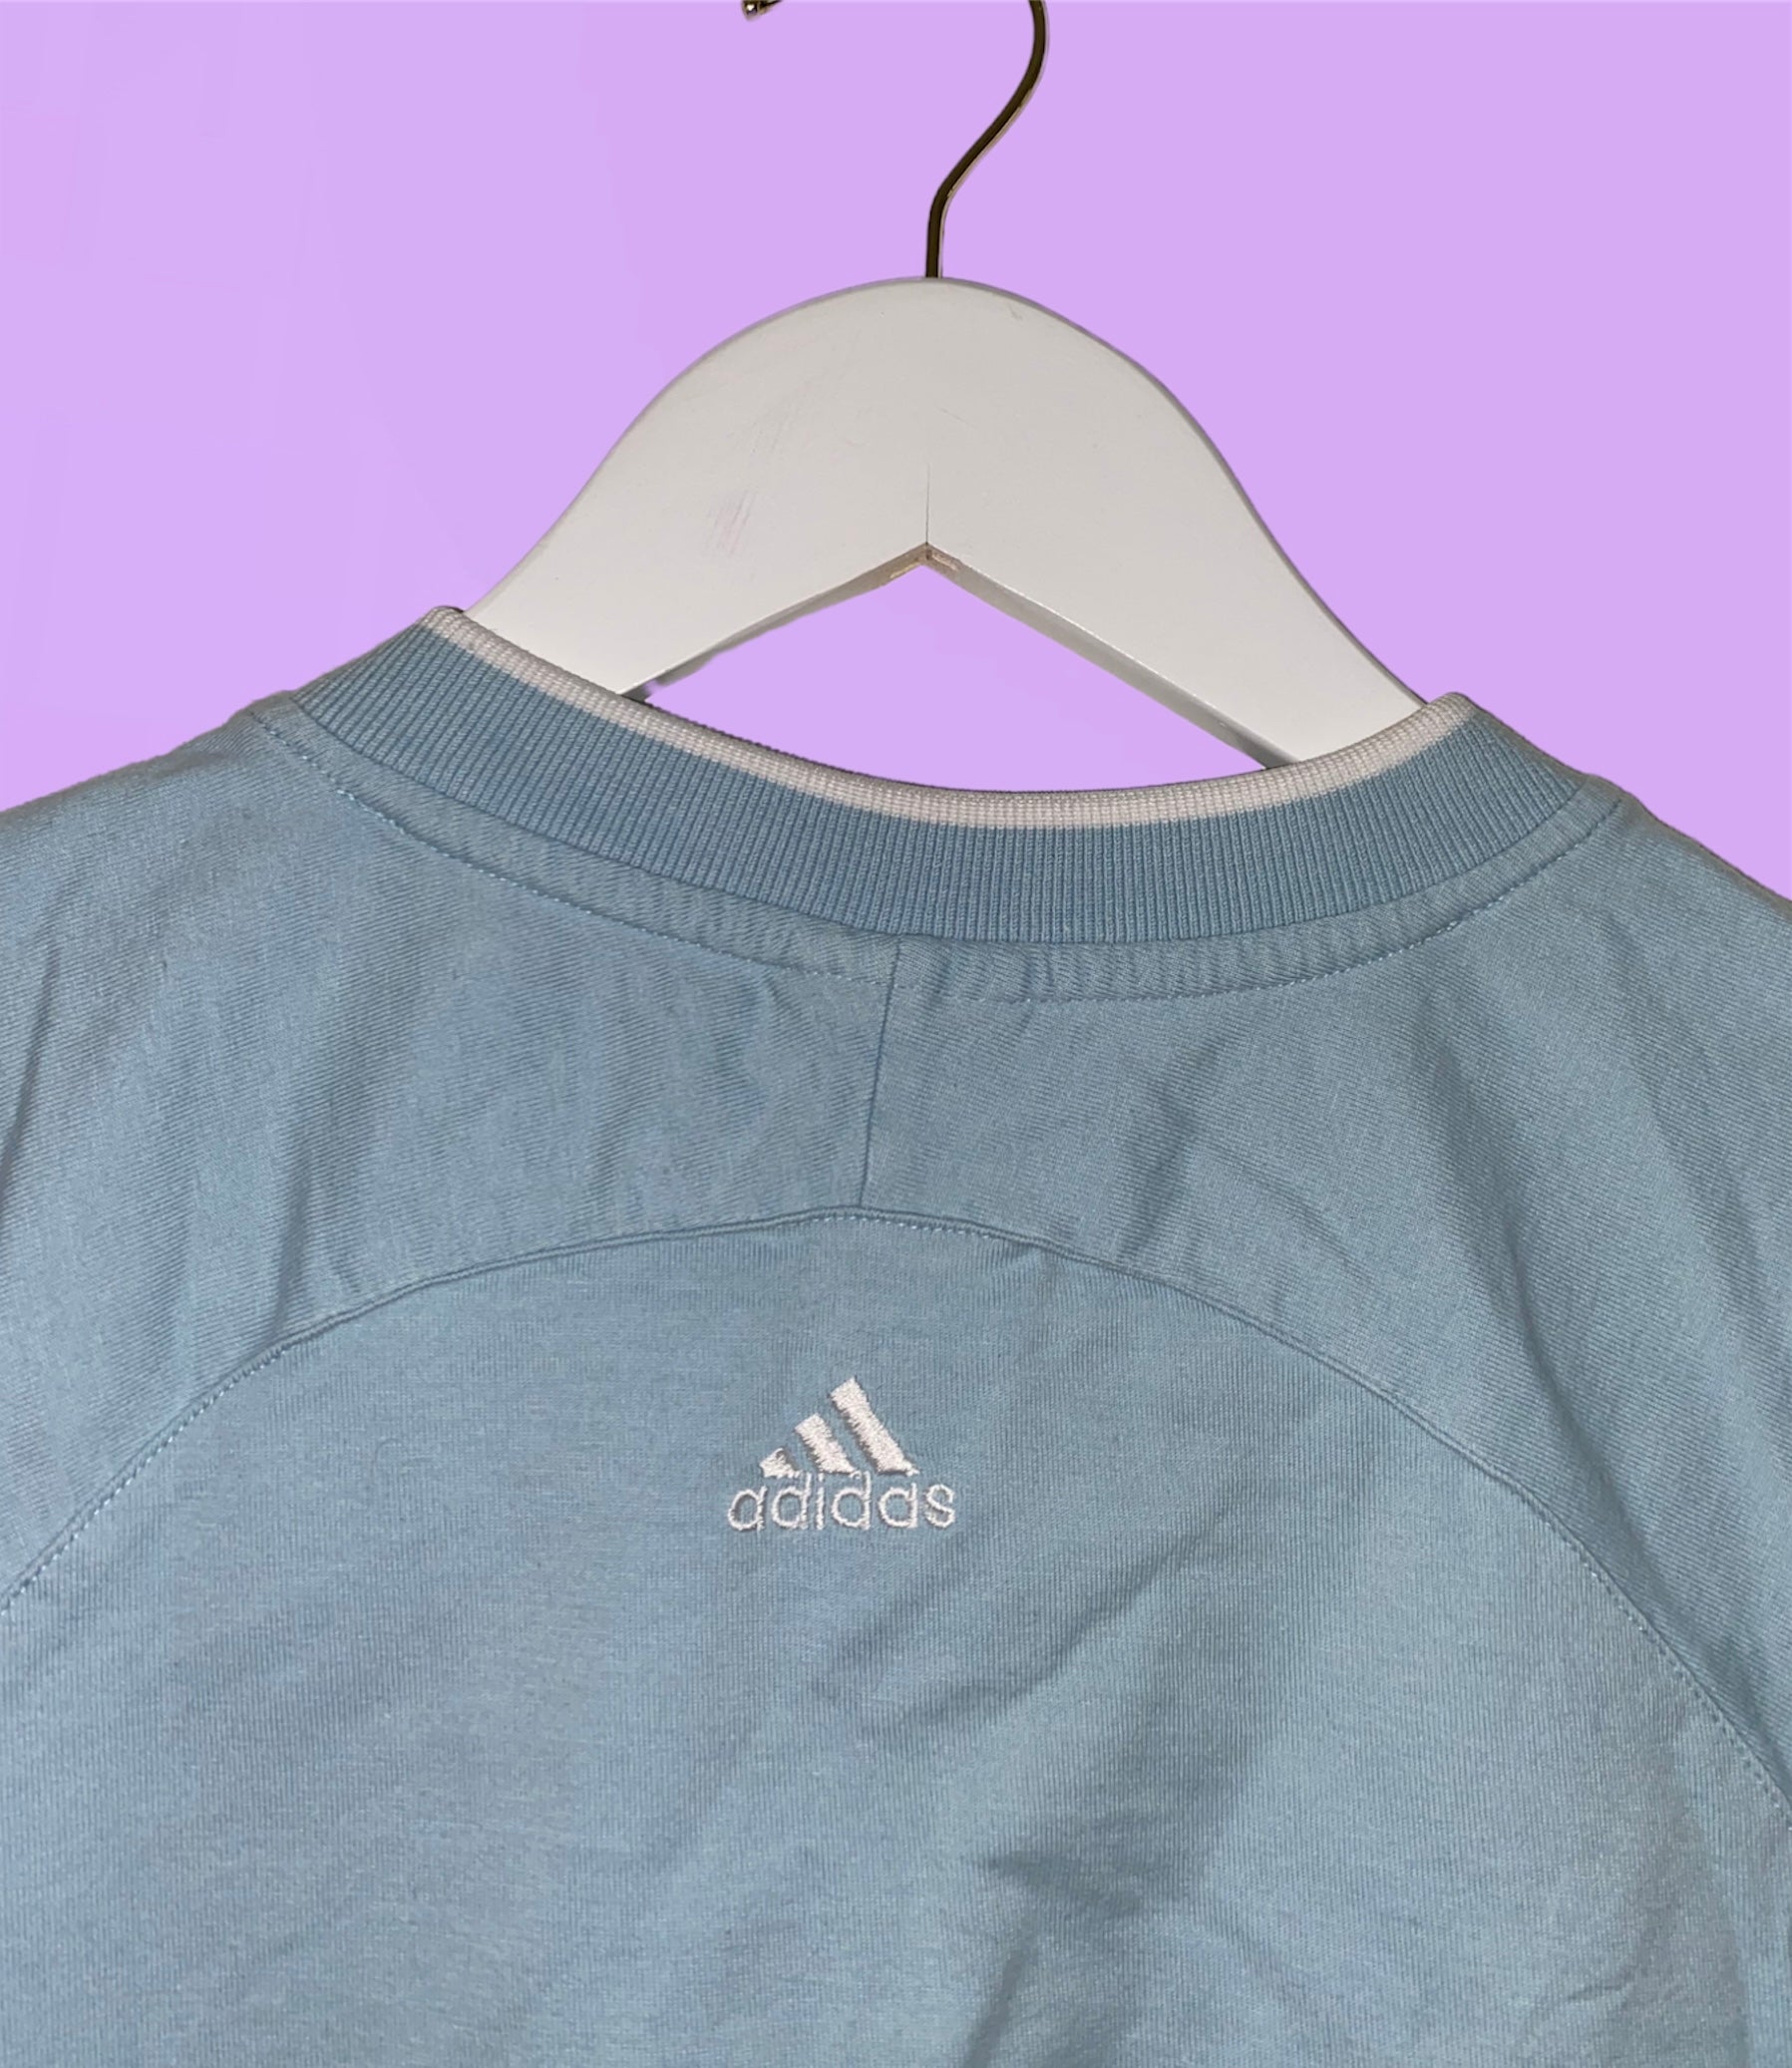 back of a light blue sleeveless crop top with white adidas logo shown on a lilac background